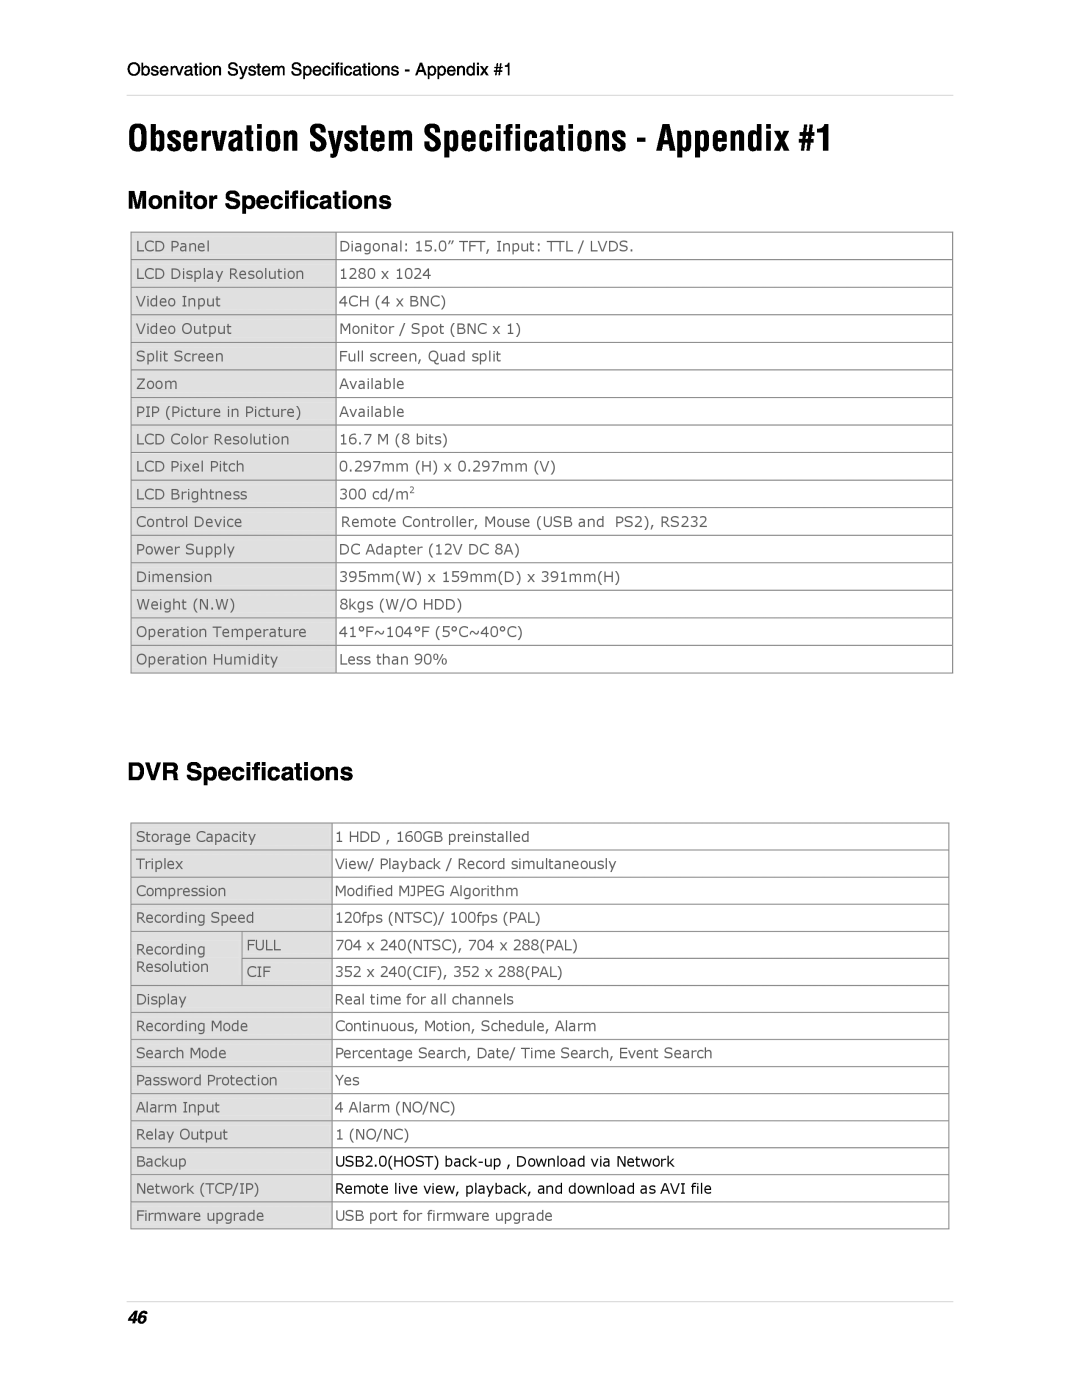 LOREX Technology L15D400 Observation System Specifications - Appendix #1, Monitor Specifications, DVR Specifications 